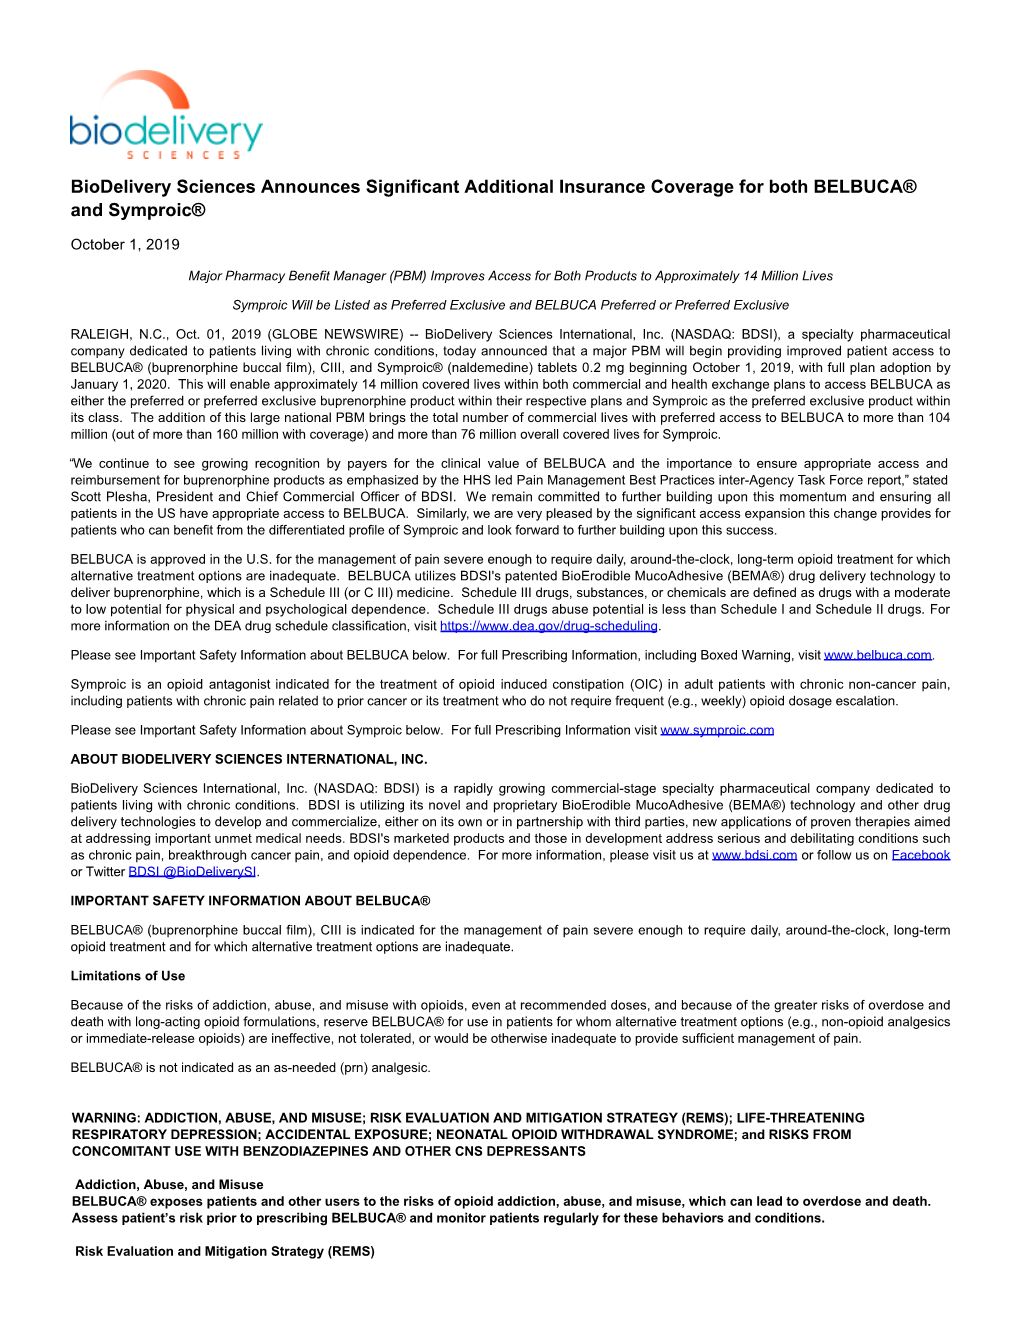 Biodelivery Sciences Announces Significant Additional Insurance Coverage for Both BELBUCA® and Symproic®